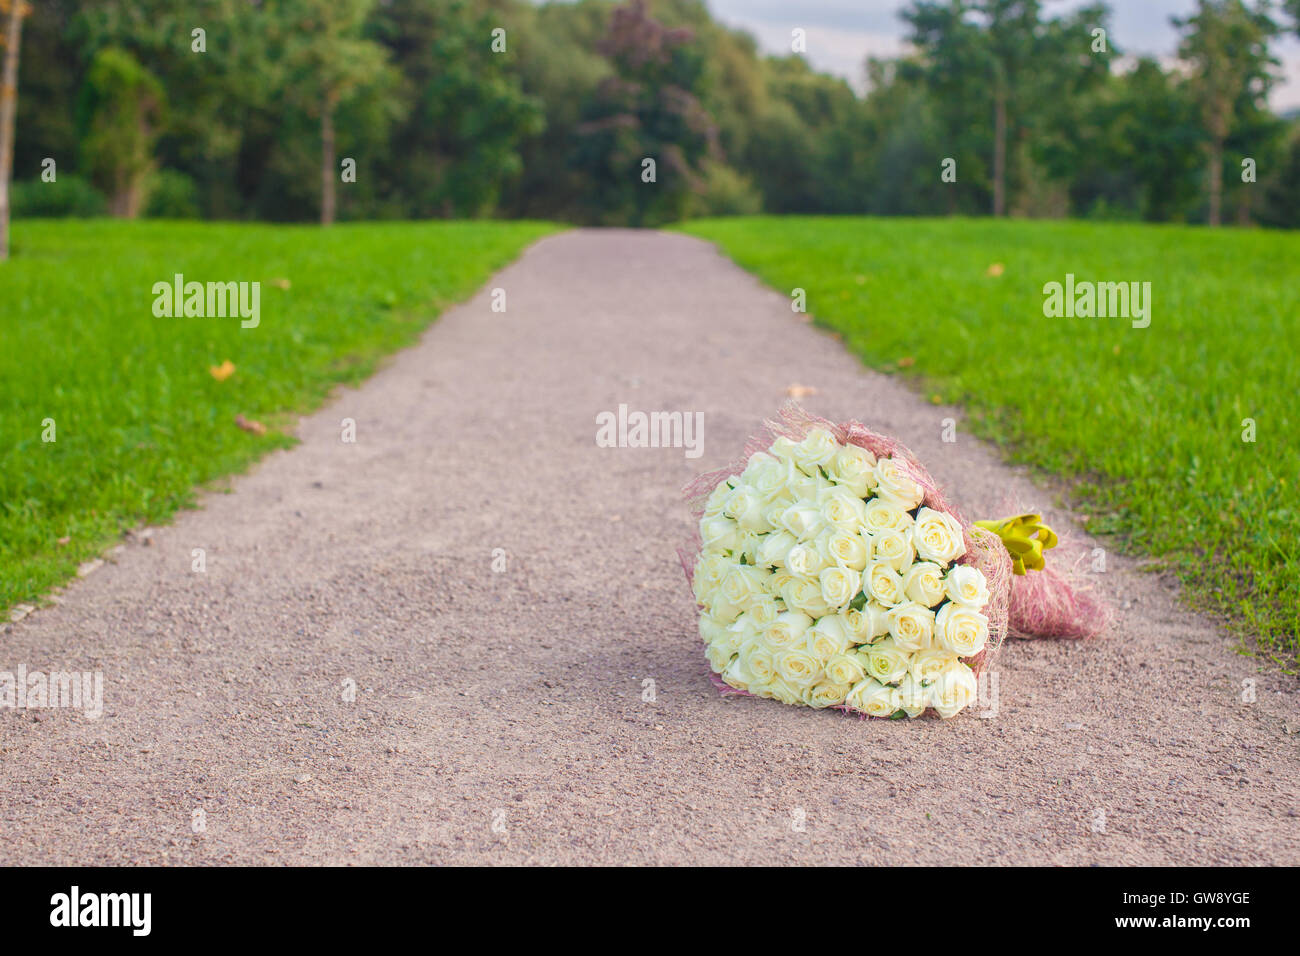 Incredibly beautiful large bouquet of white roses on a sandy path in the garden Stock Photo